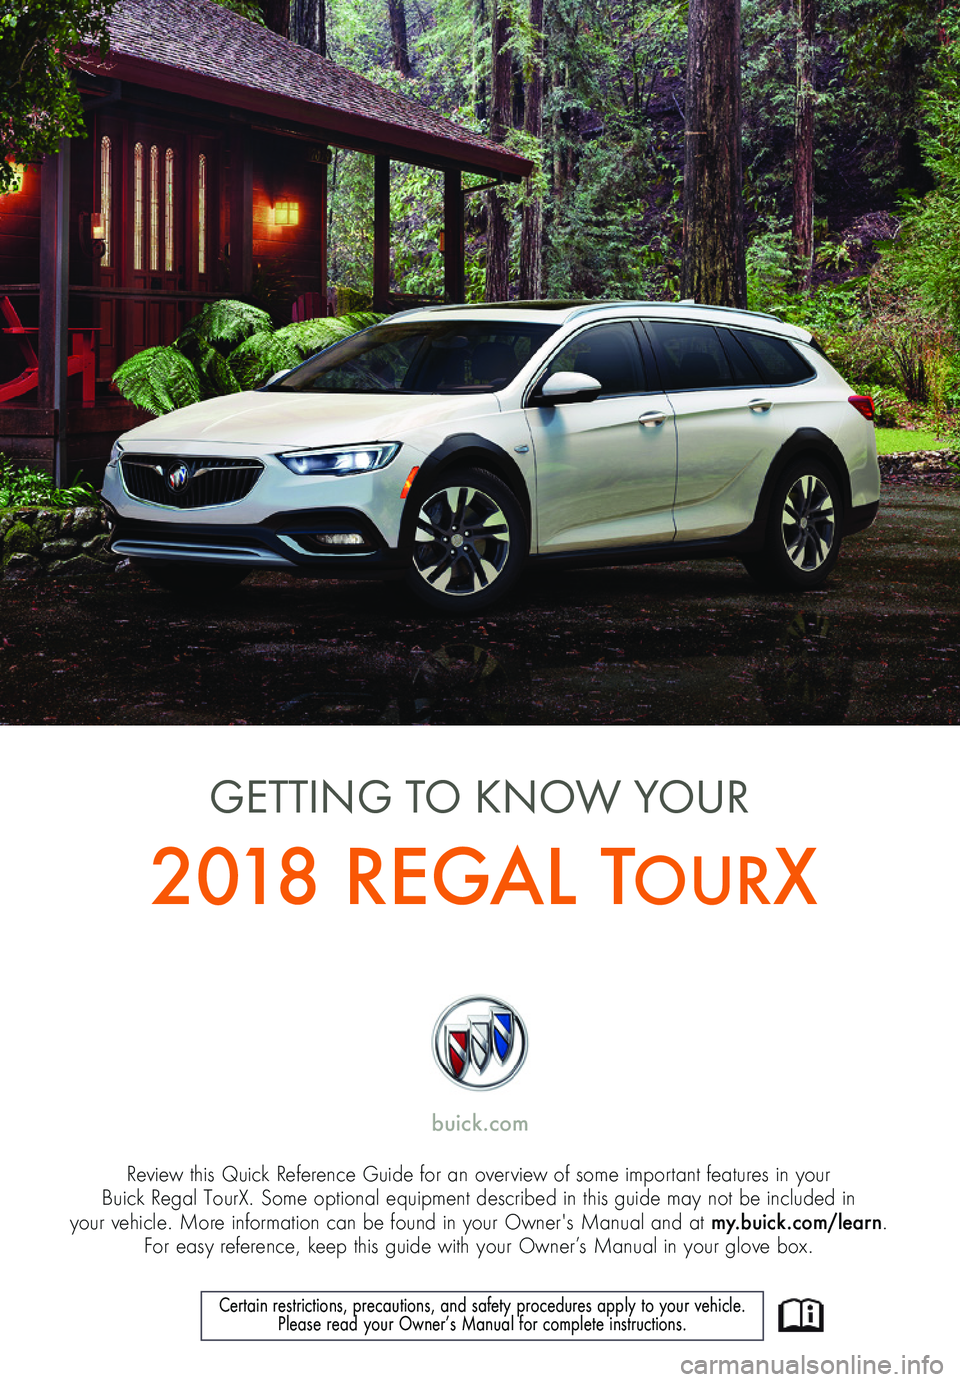 BUICK REGAL TOURX 2018  Get To Know Guide 